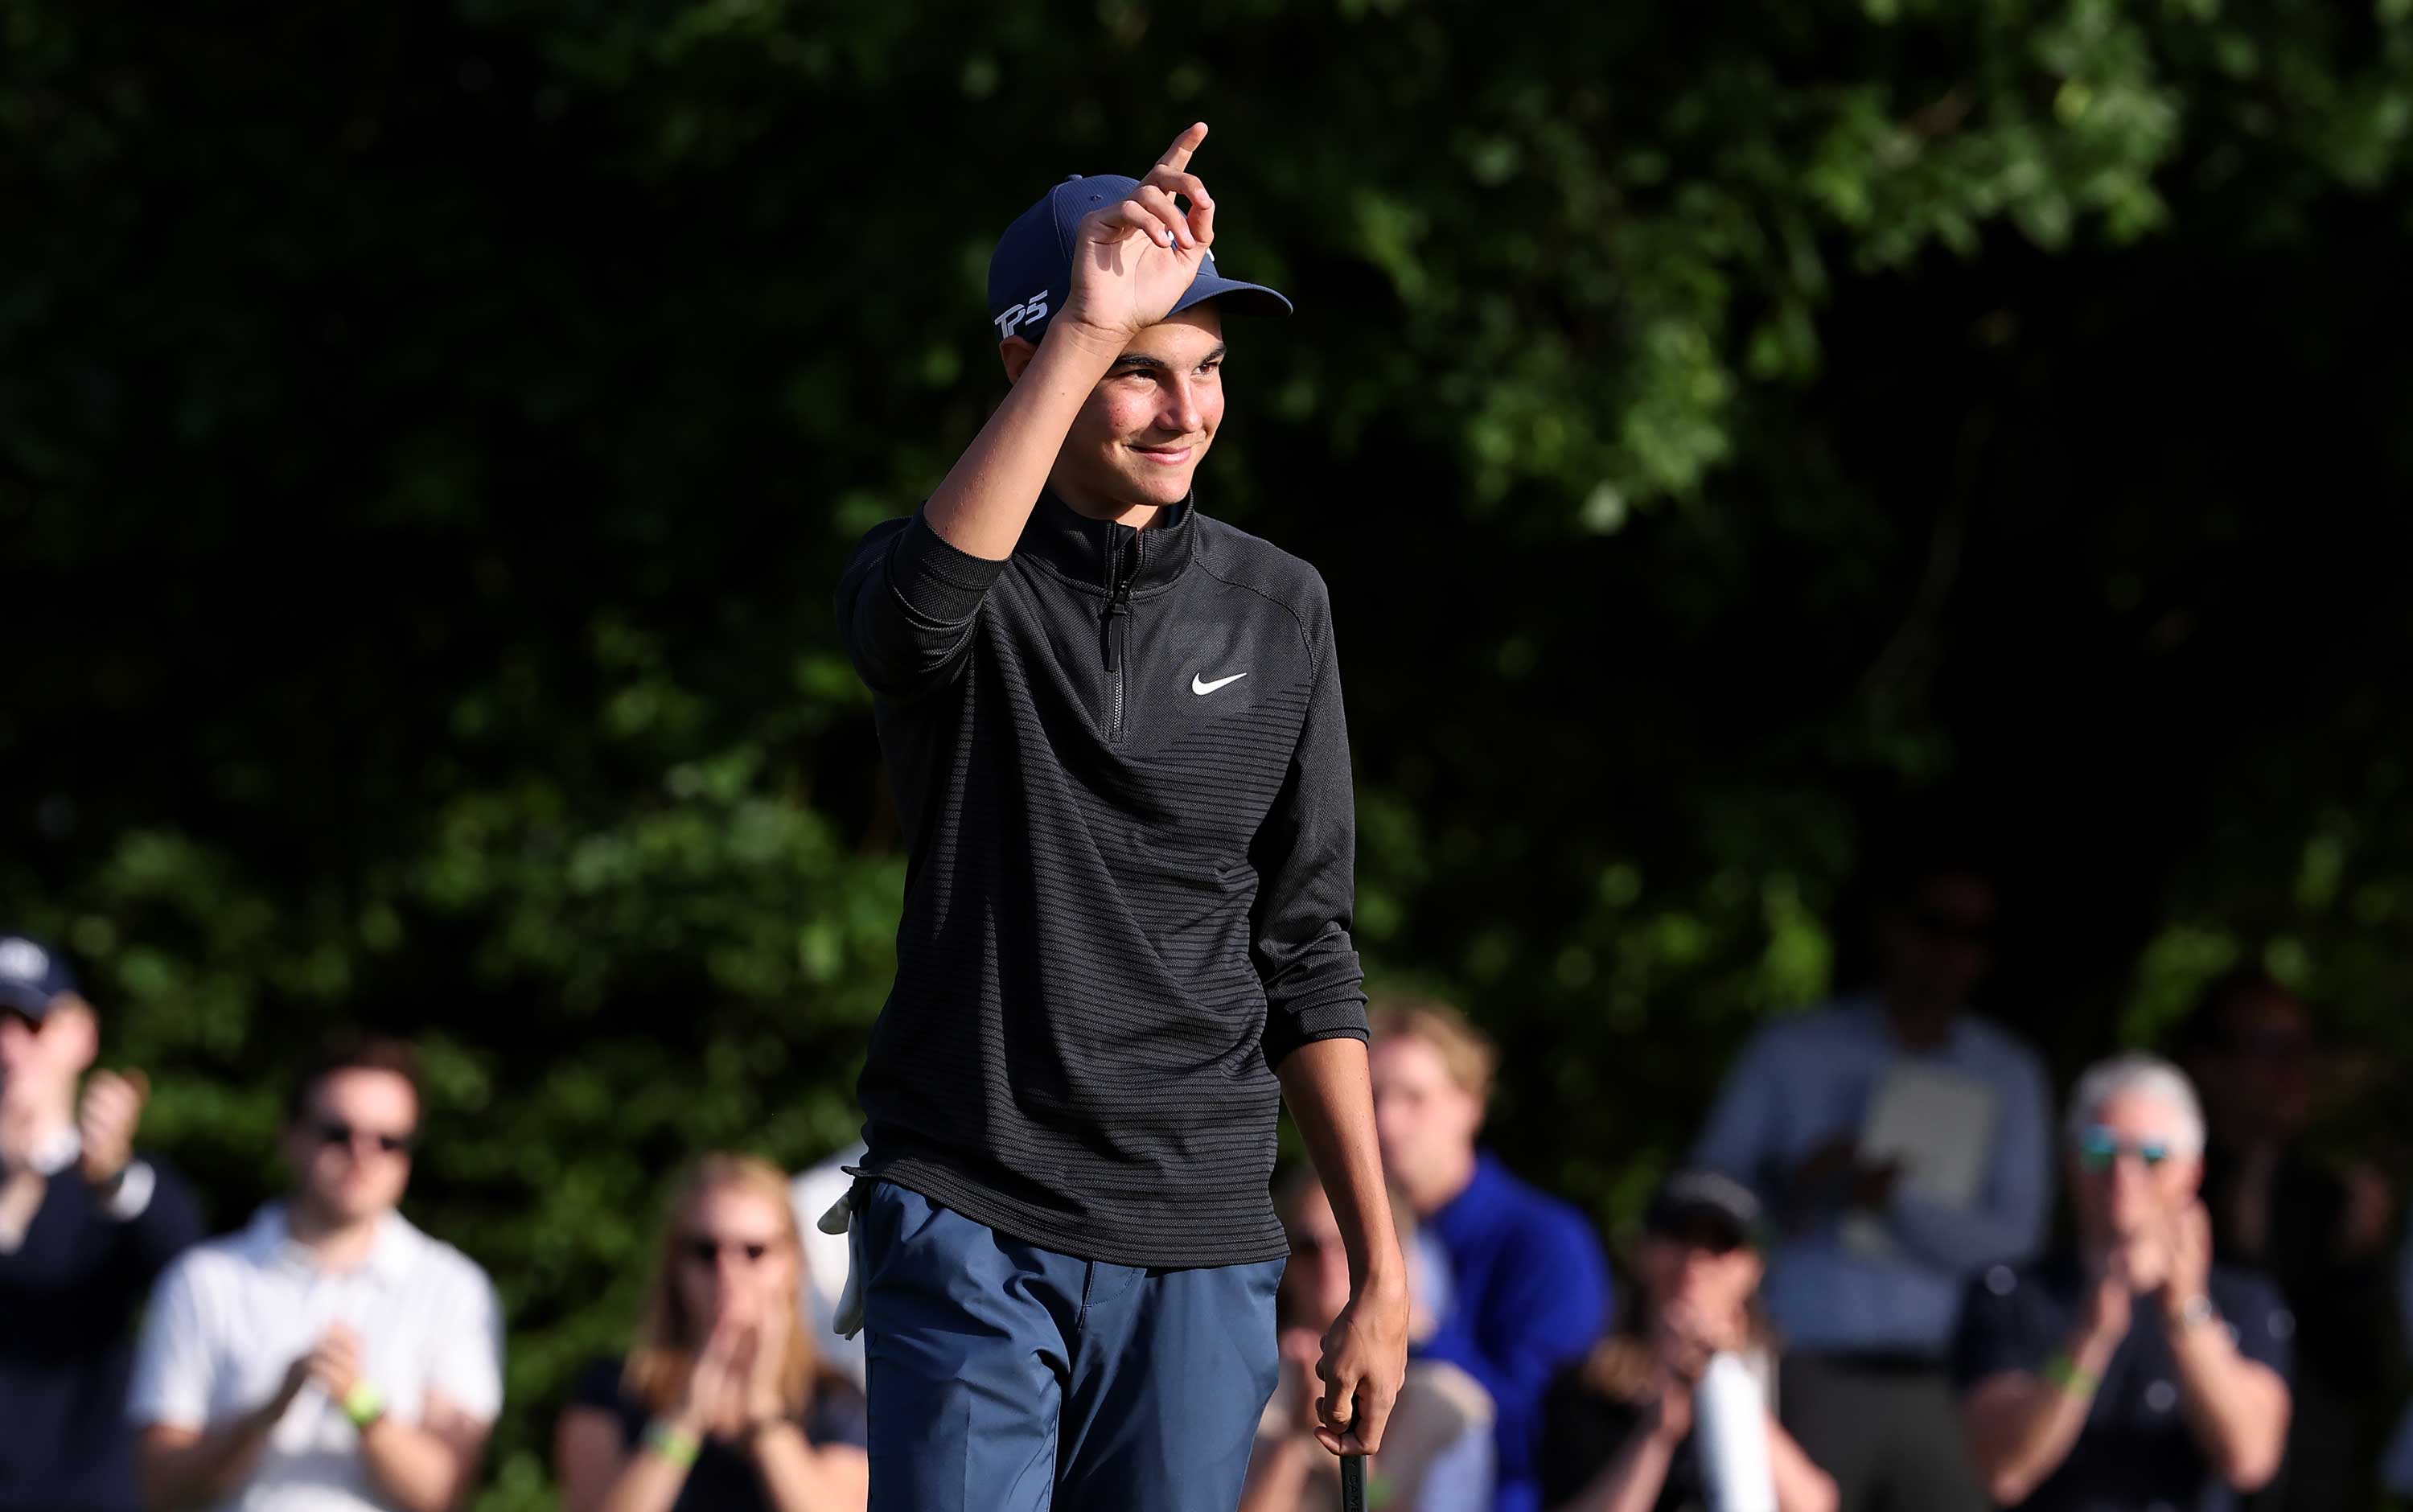 Amateur Student Creampie - 14-year-old Ukrainian amateur becomes second youngest golfer to make cut on  DP World Tour | Golf News and Tour Information | GolfDigest.com